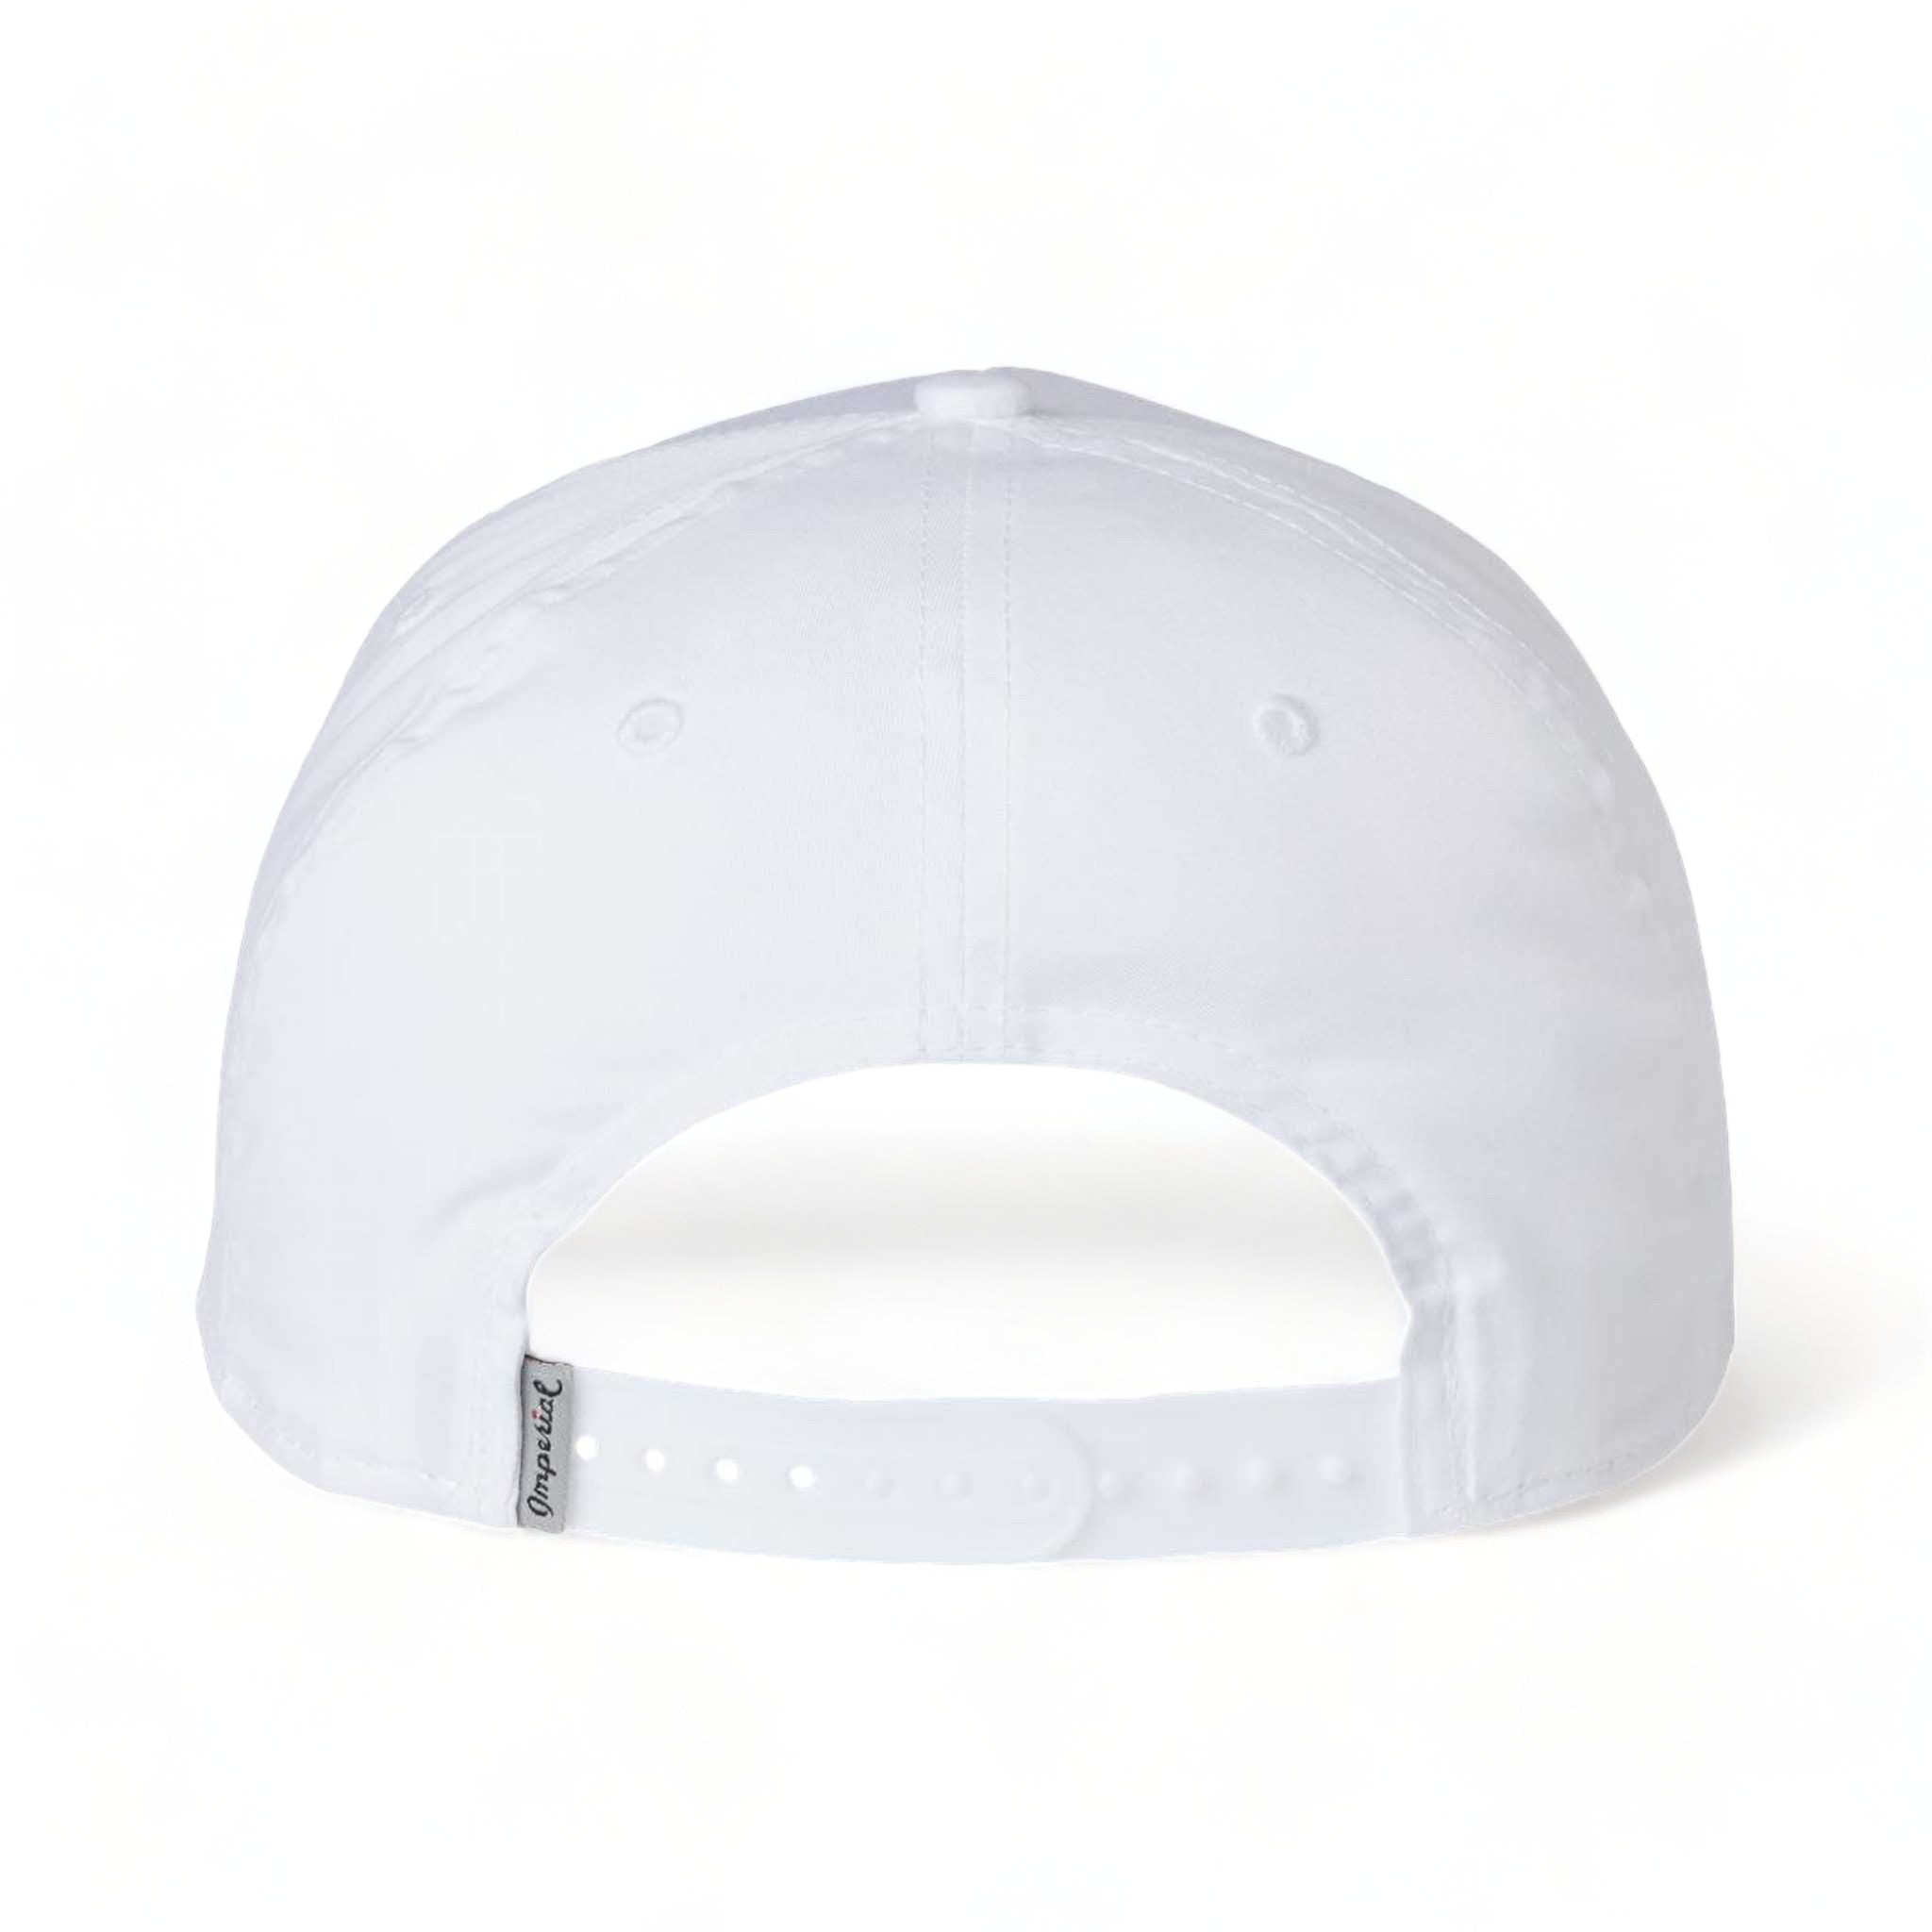 Back view of Imperial 5056 custom hat in white and navy